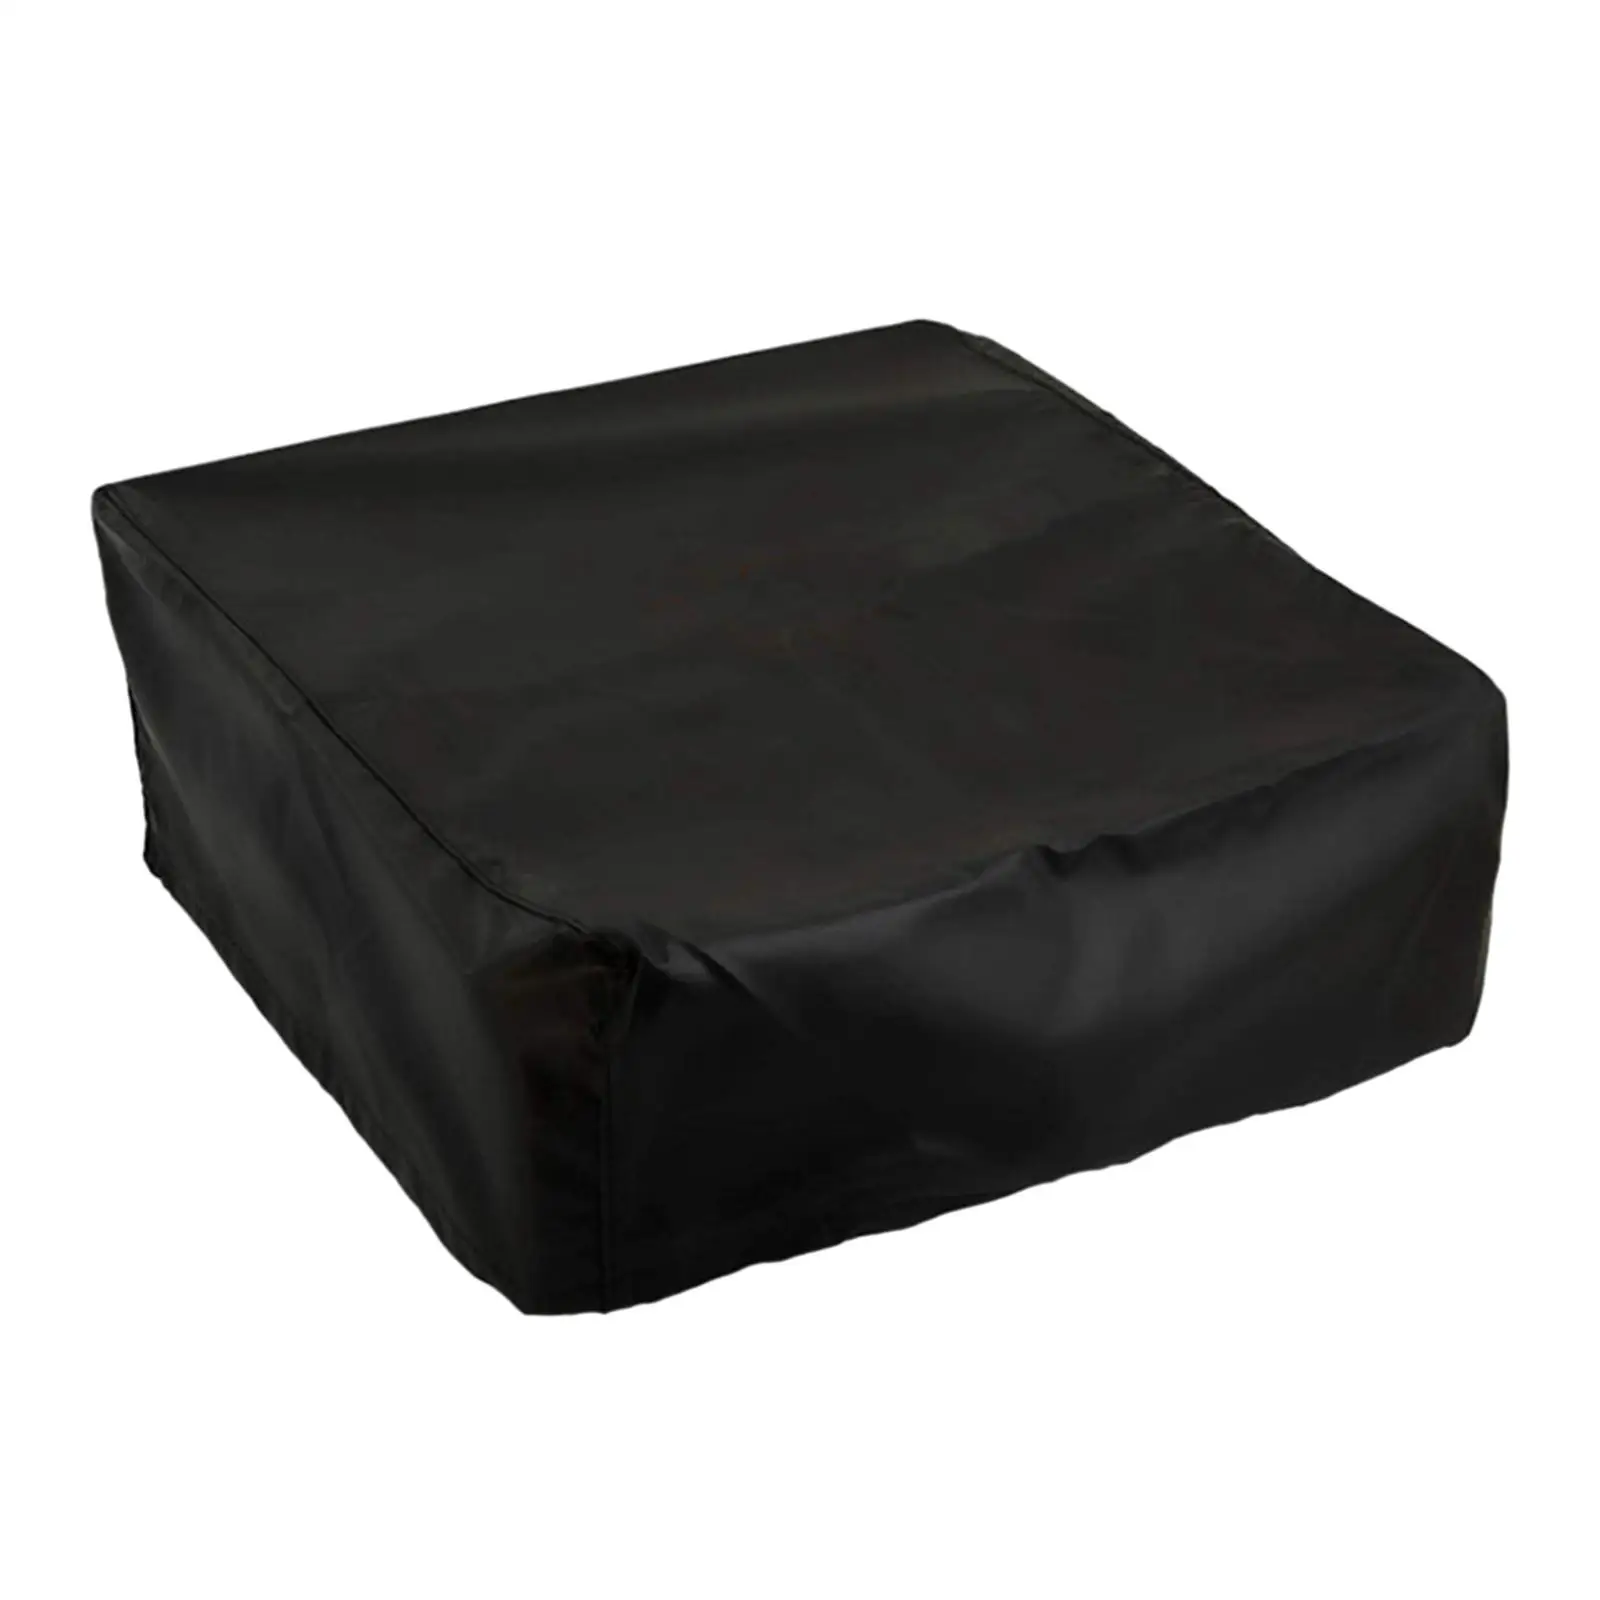 Grill Cover Waterproof Elastic Strap Design Heavy Duty Portable Outdoor Use Weather Protection Replace for Kitchen BBQ